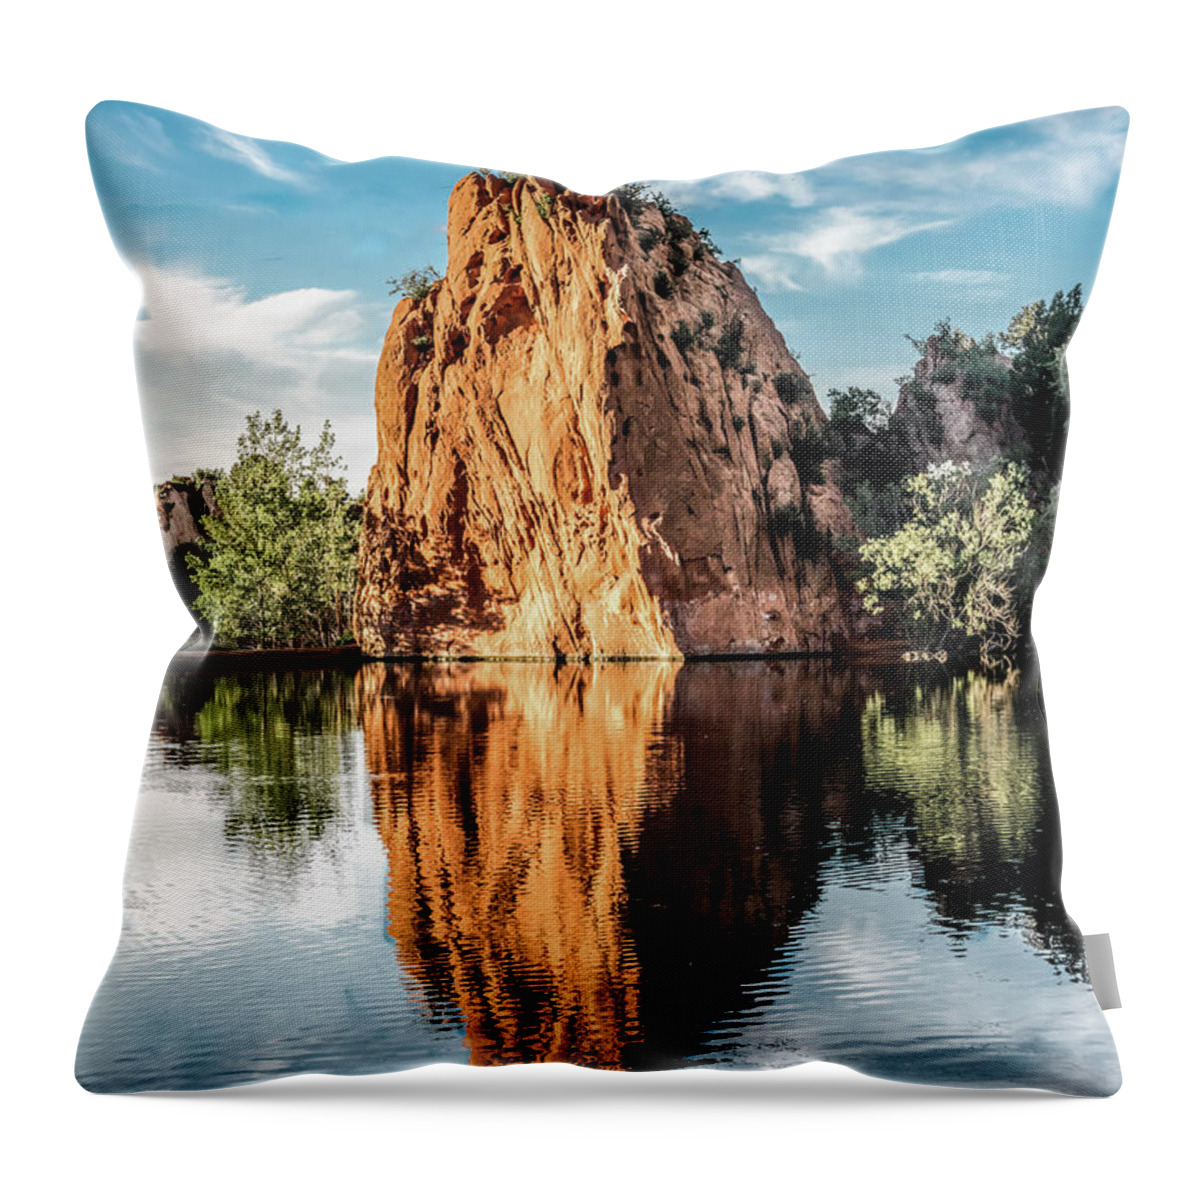 Landscape Throw Pillow featuring the photograph Red Rock by Jaime Mercado